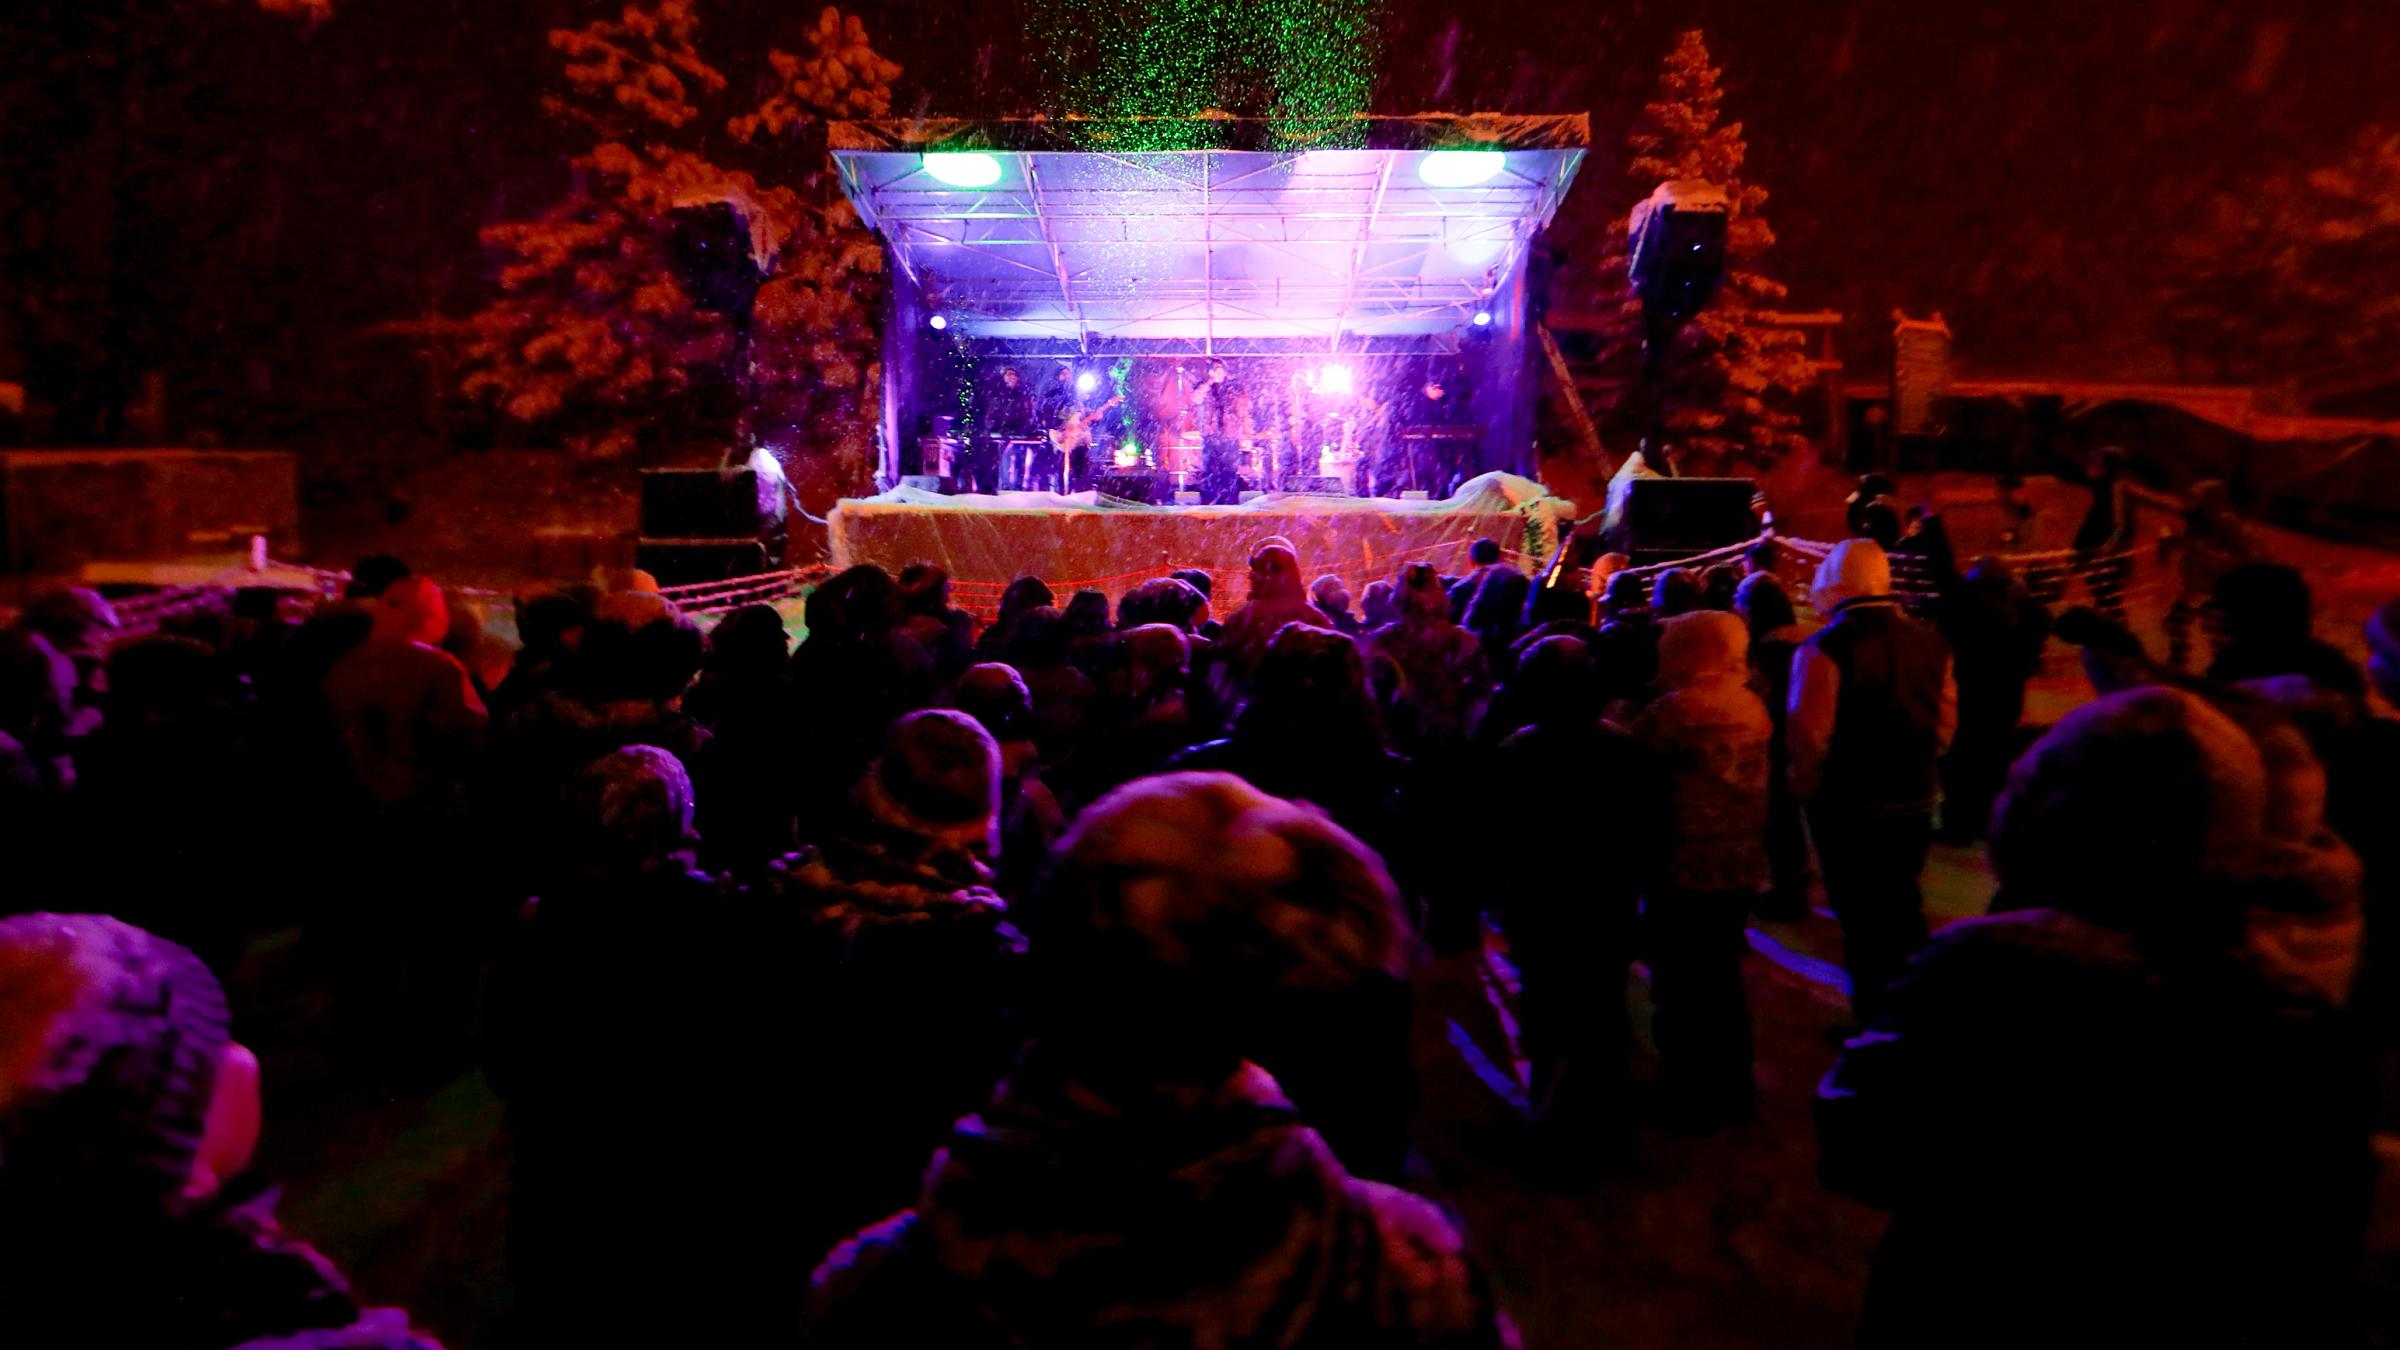 View of stage from base area for the torchlight performance